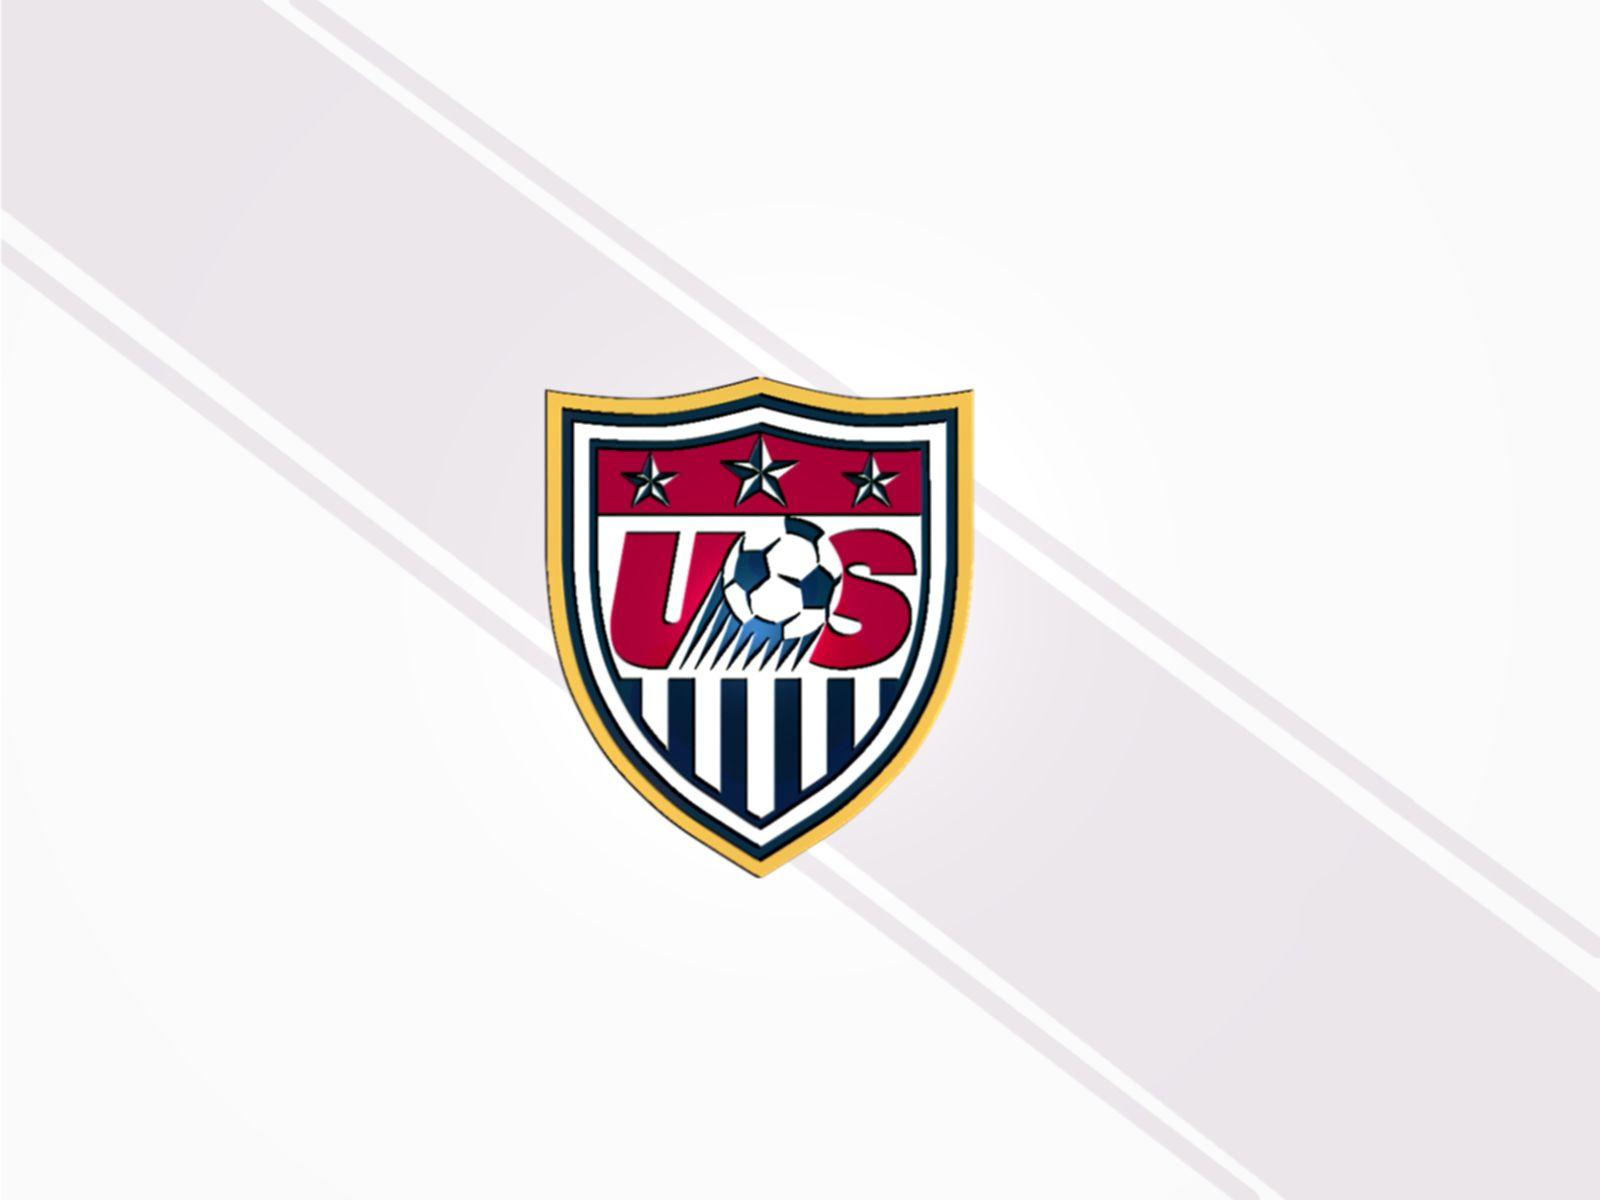 Team Usa Soccer Wallpaper Image & Picture